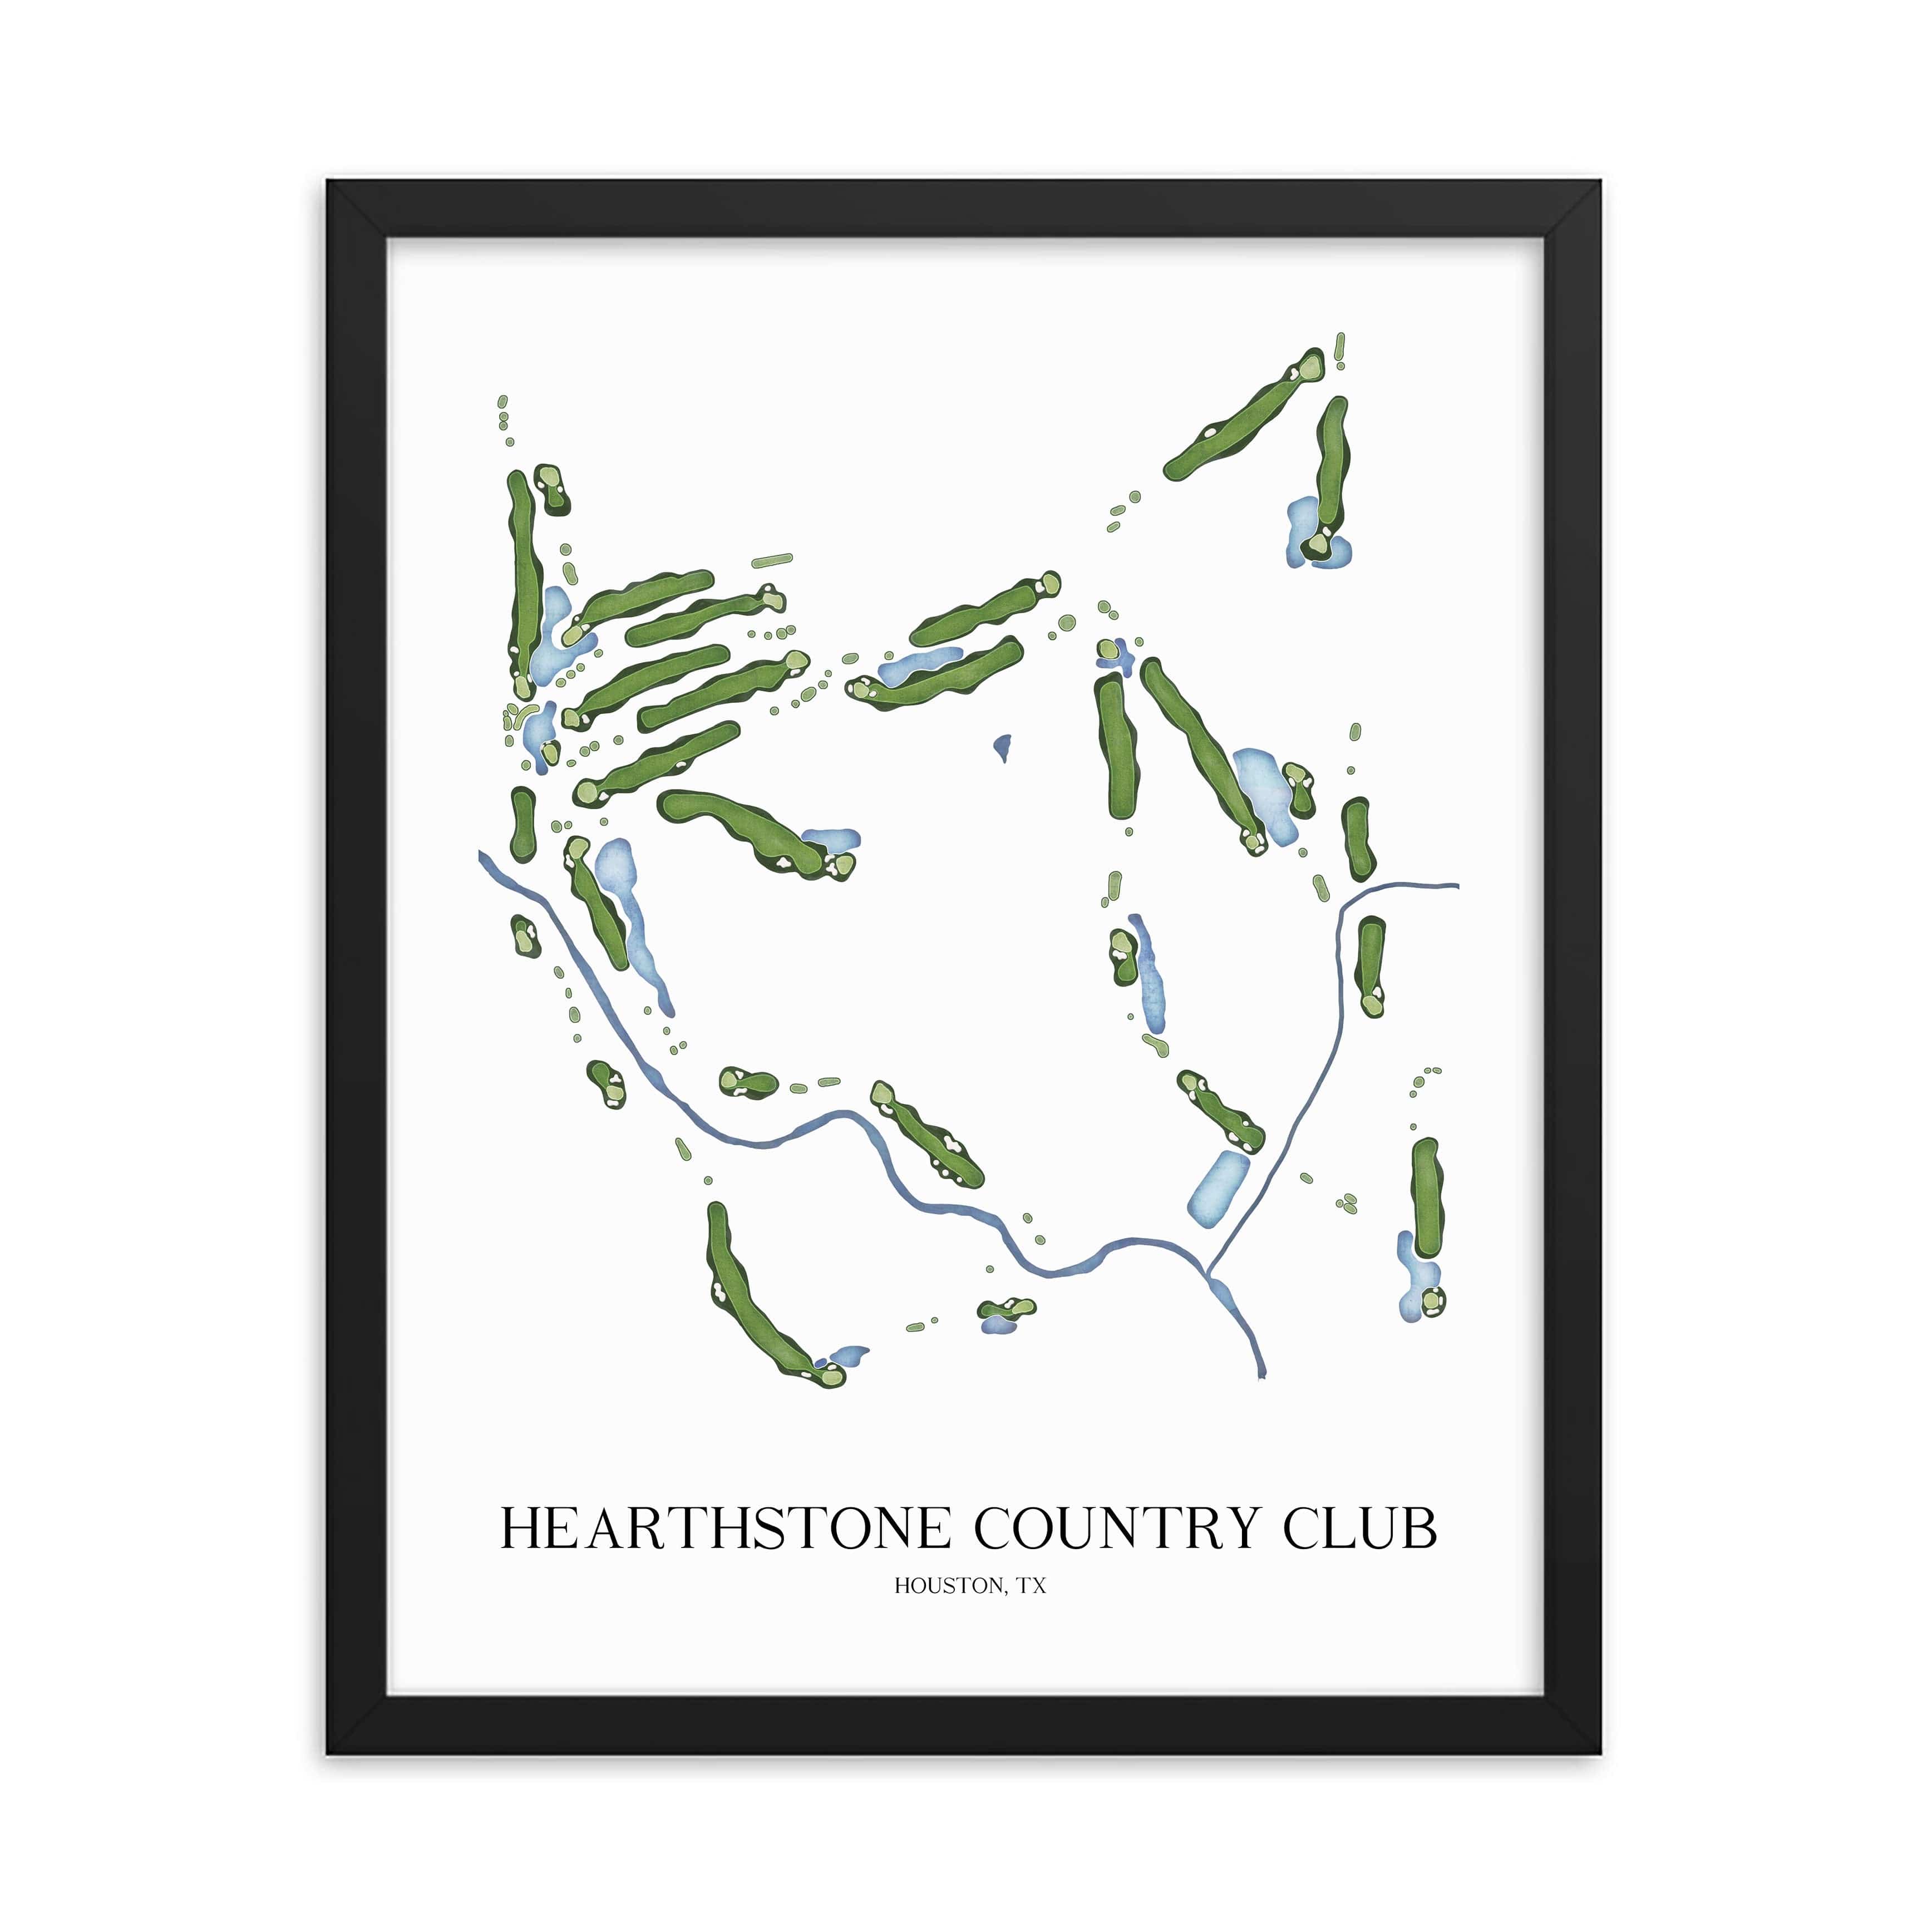 The 19th Hole Golf Shop - Golf Course Prints -  Hearthstone Country Club Golf Course Map